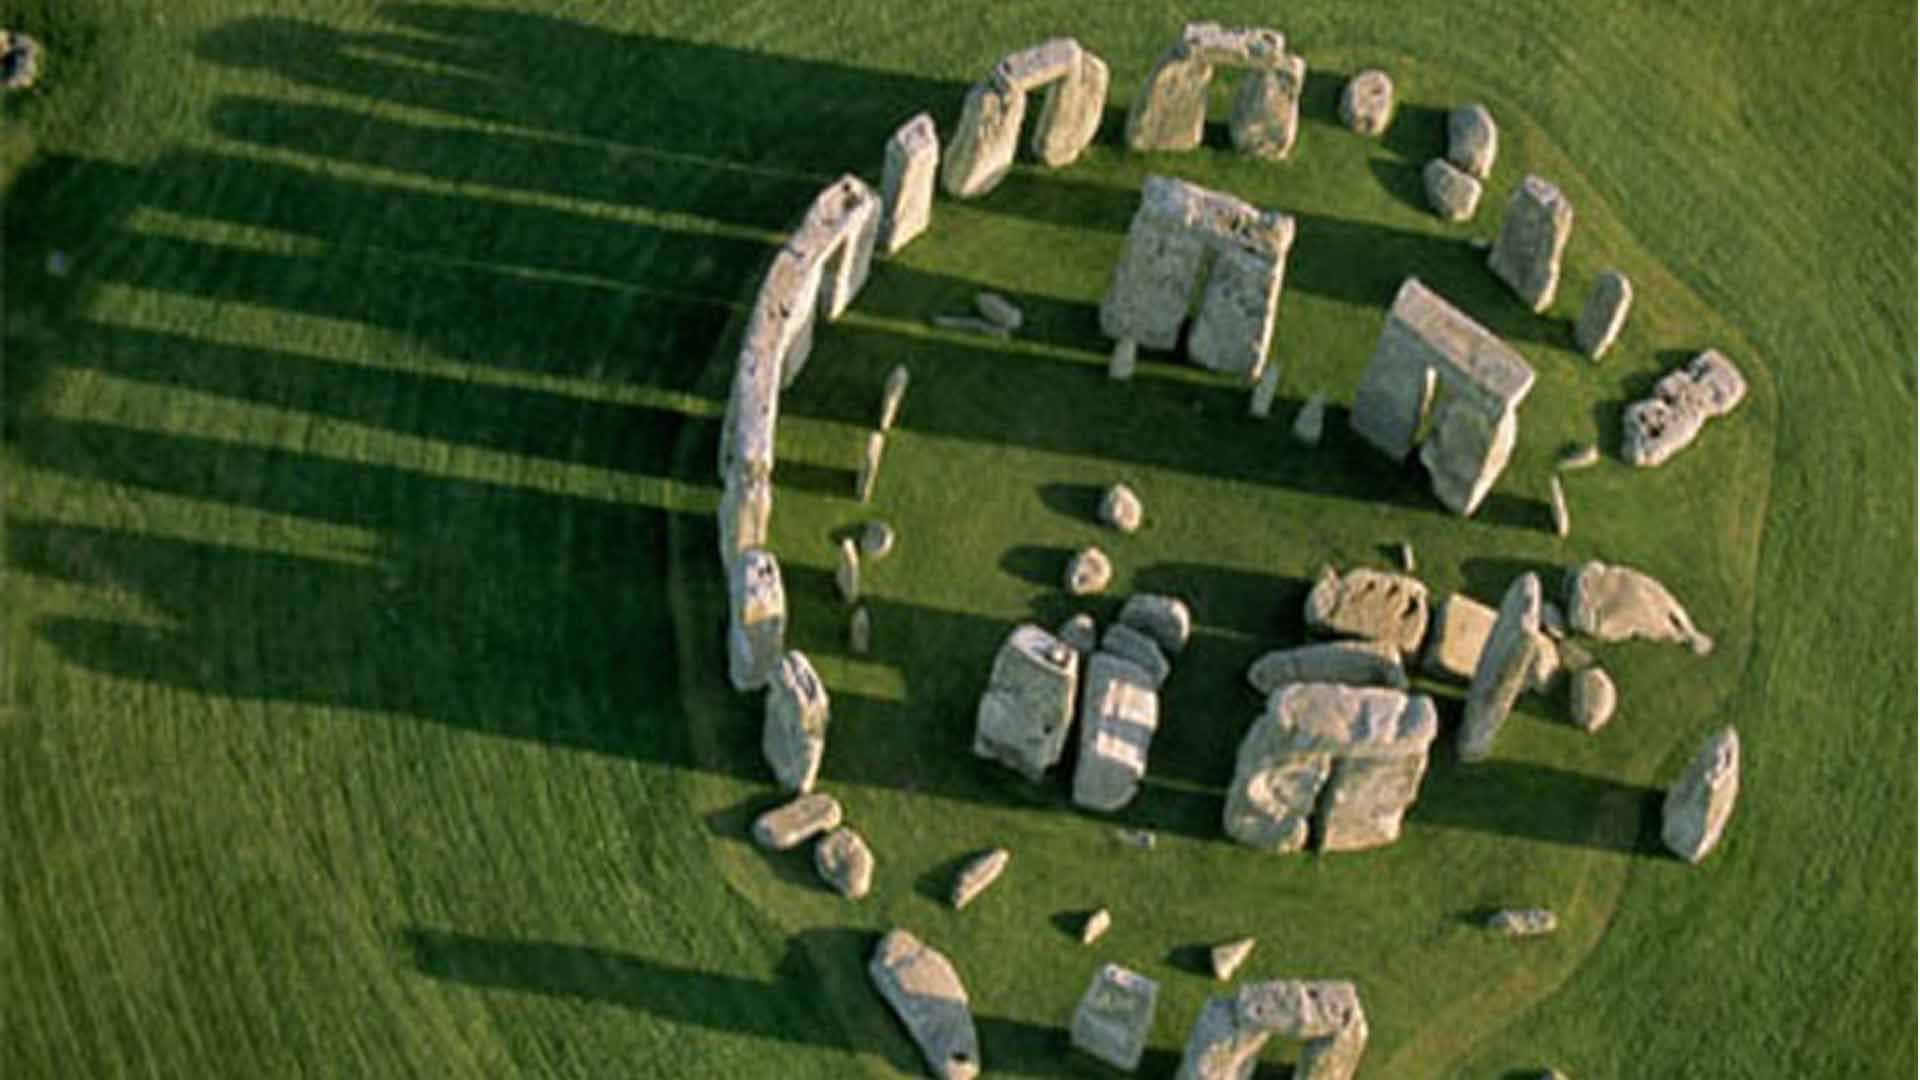 1581193339 399 Important information about Stonehenge in England - Important information about Stonehenge in England